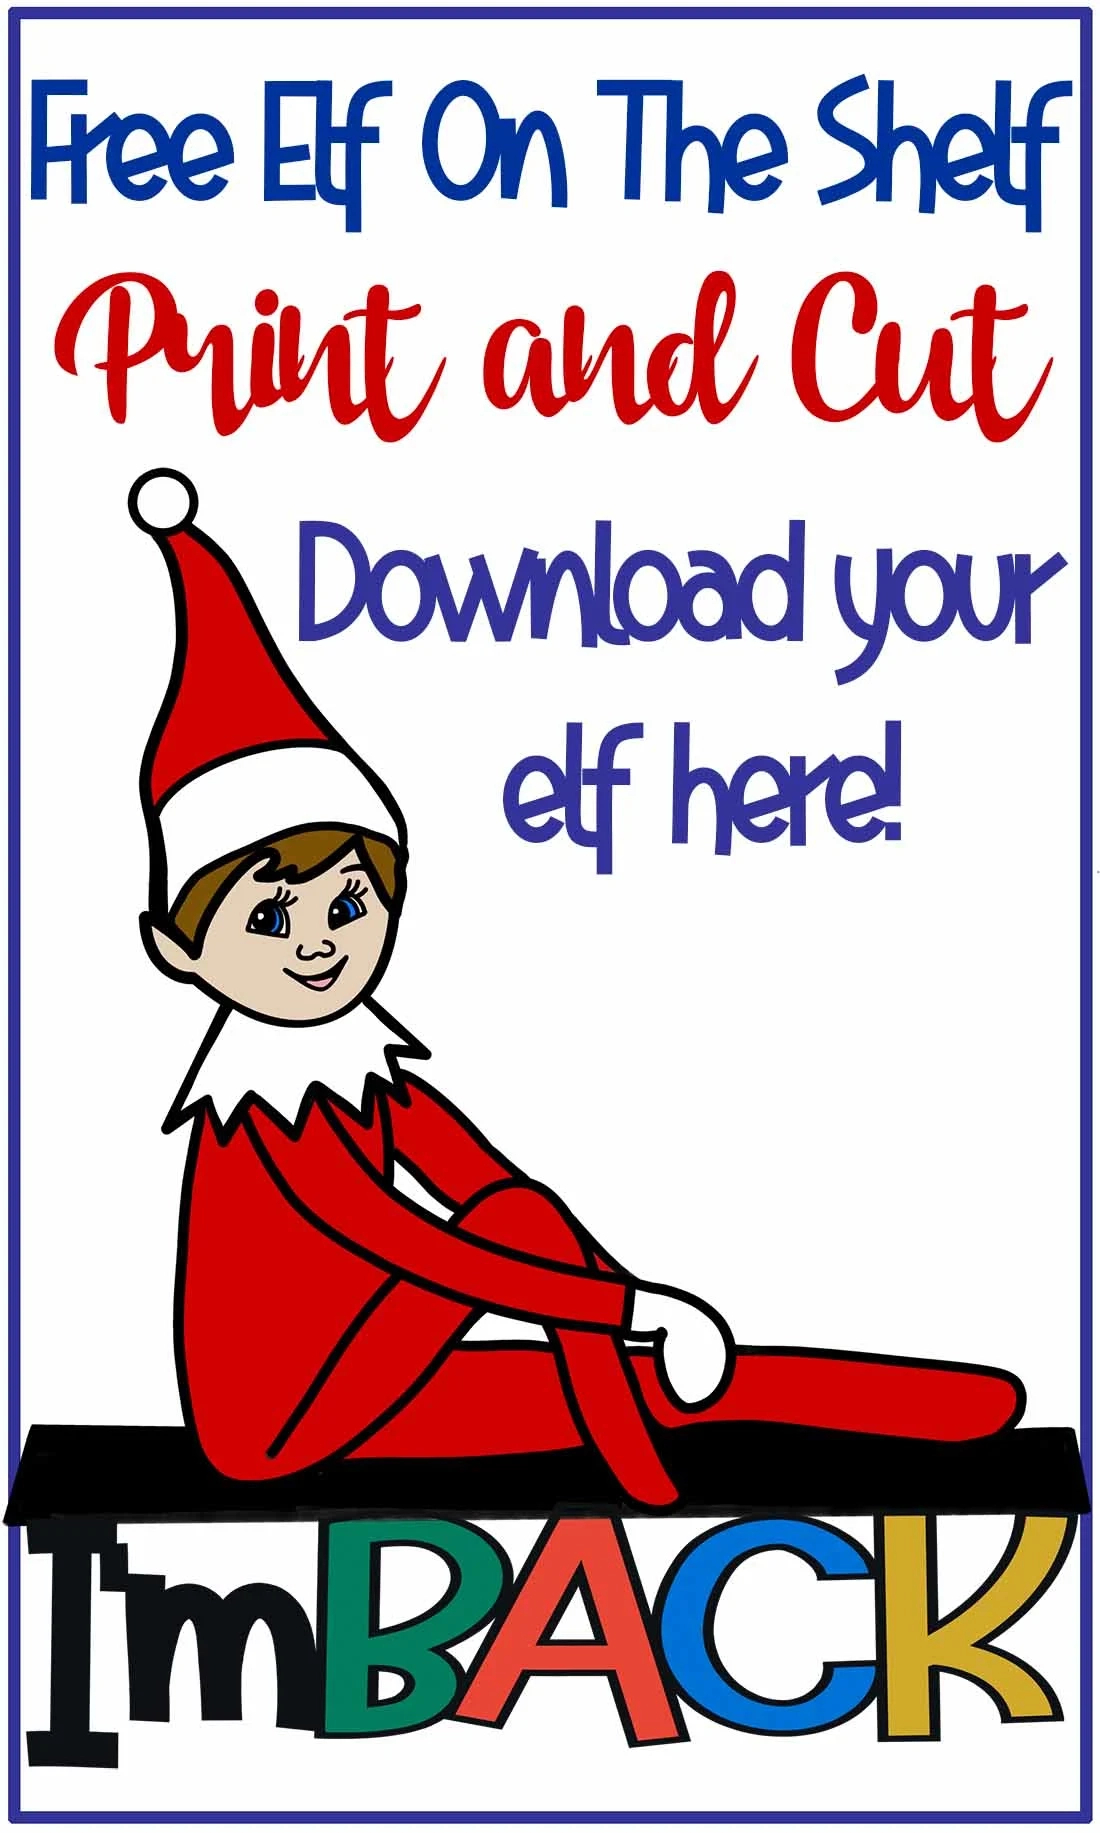 Free Elf On The Shelf Printable (Stickers Png ) - Like Love Do - Free Elf On The Shelf Printables Uk